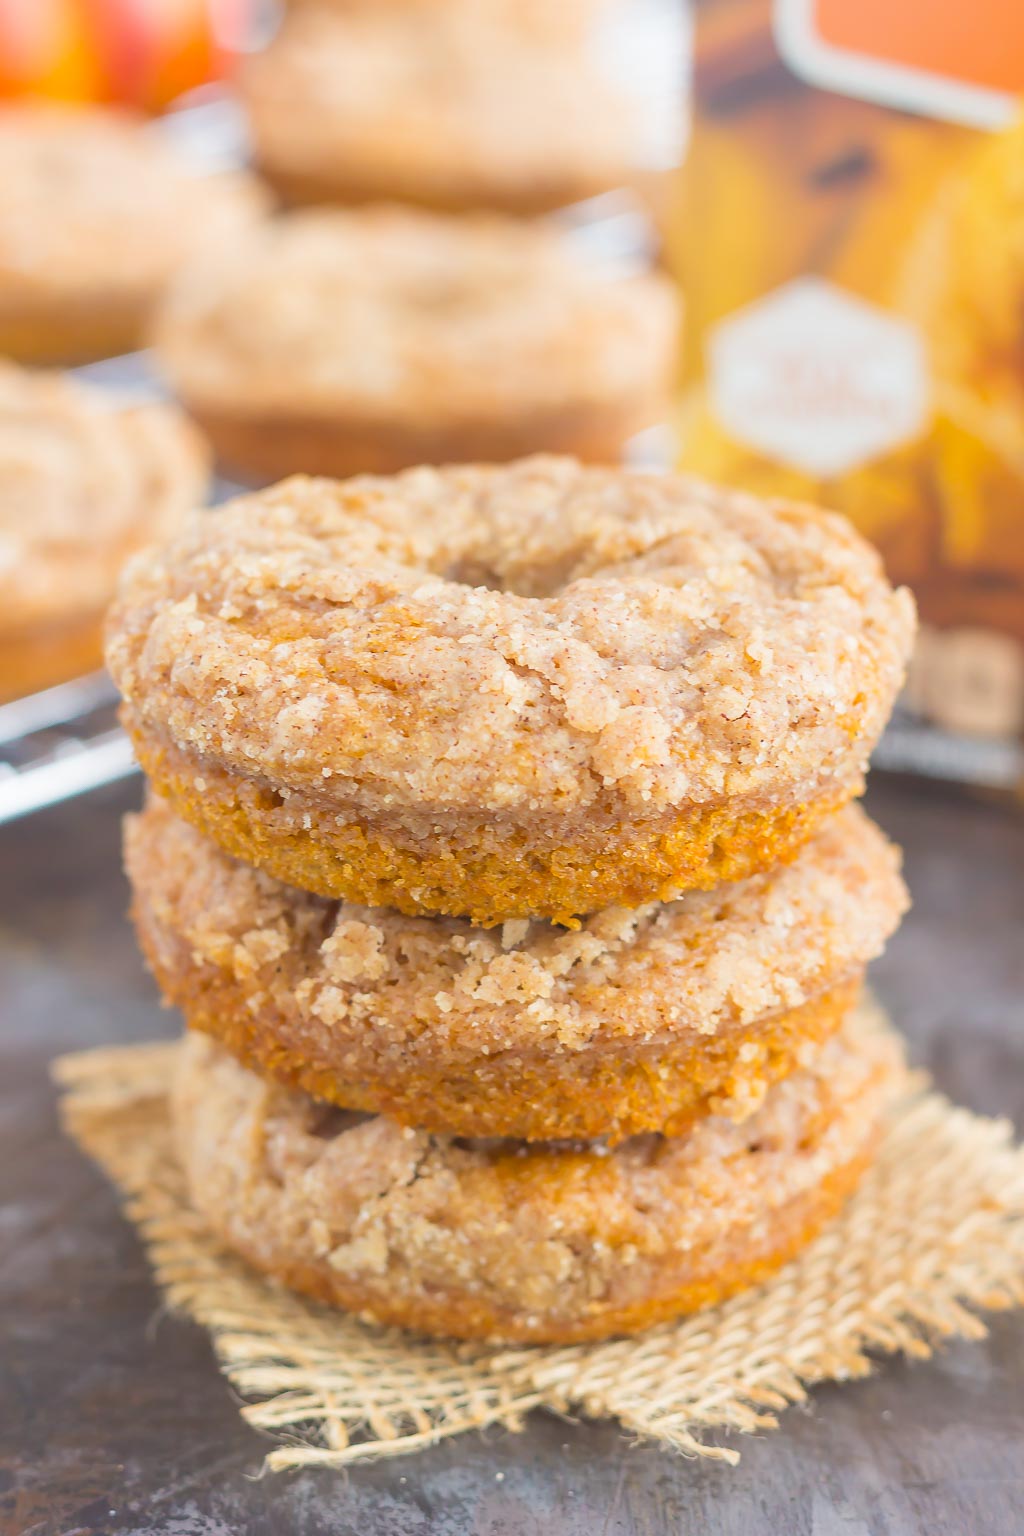 These Baked Pumpkin Streusel Donuts are soft, fluffy, and bursting with pumpkin. Filled with cozy fall flavors and topped with a sweet cinnamon streusel, this easy treat is the perfect fall breakfast or dessert!